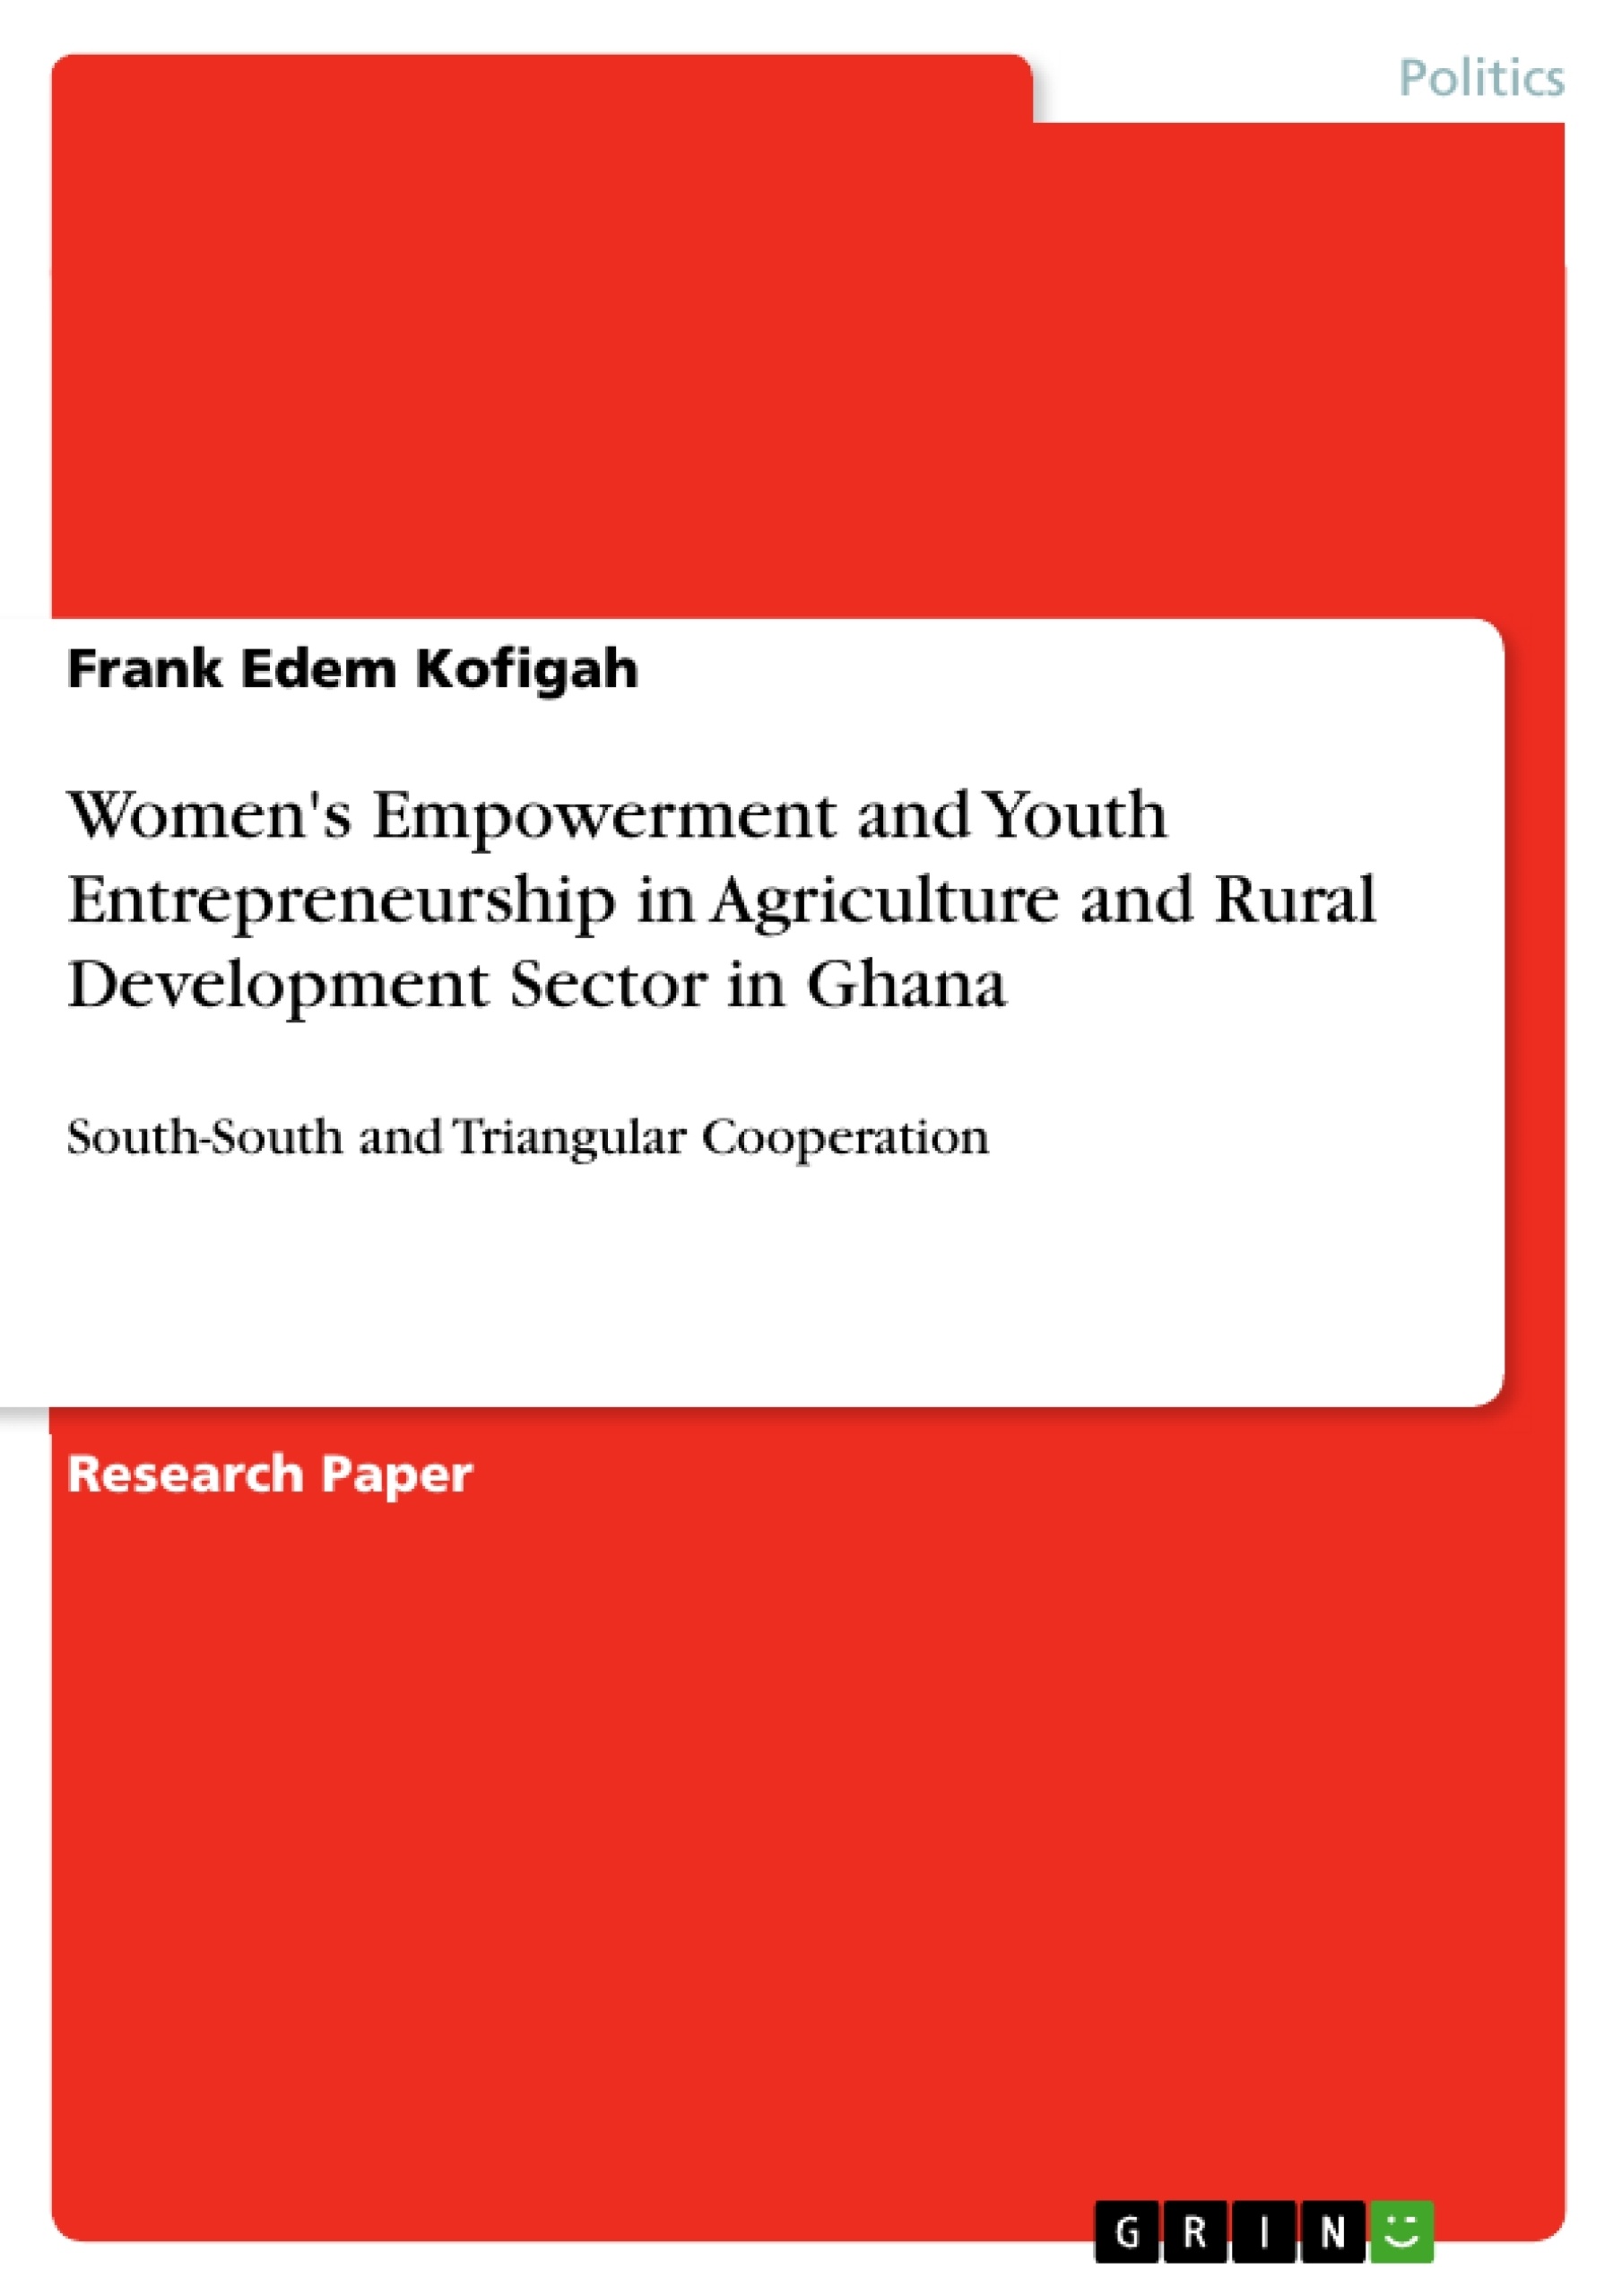 Title: Women's Empowerment and Youth Entrepreneurship in Agriculture and Rural Development Sector in Ghana